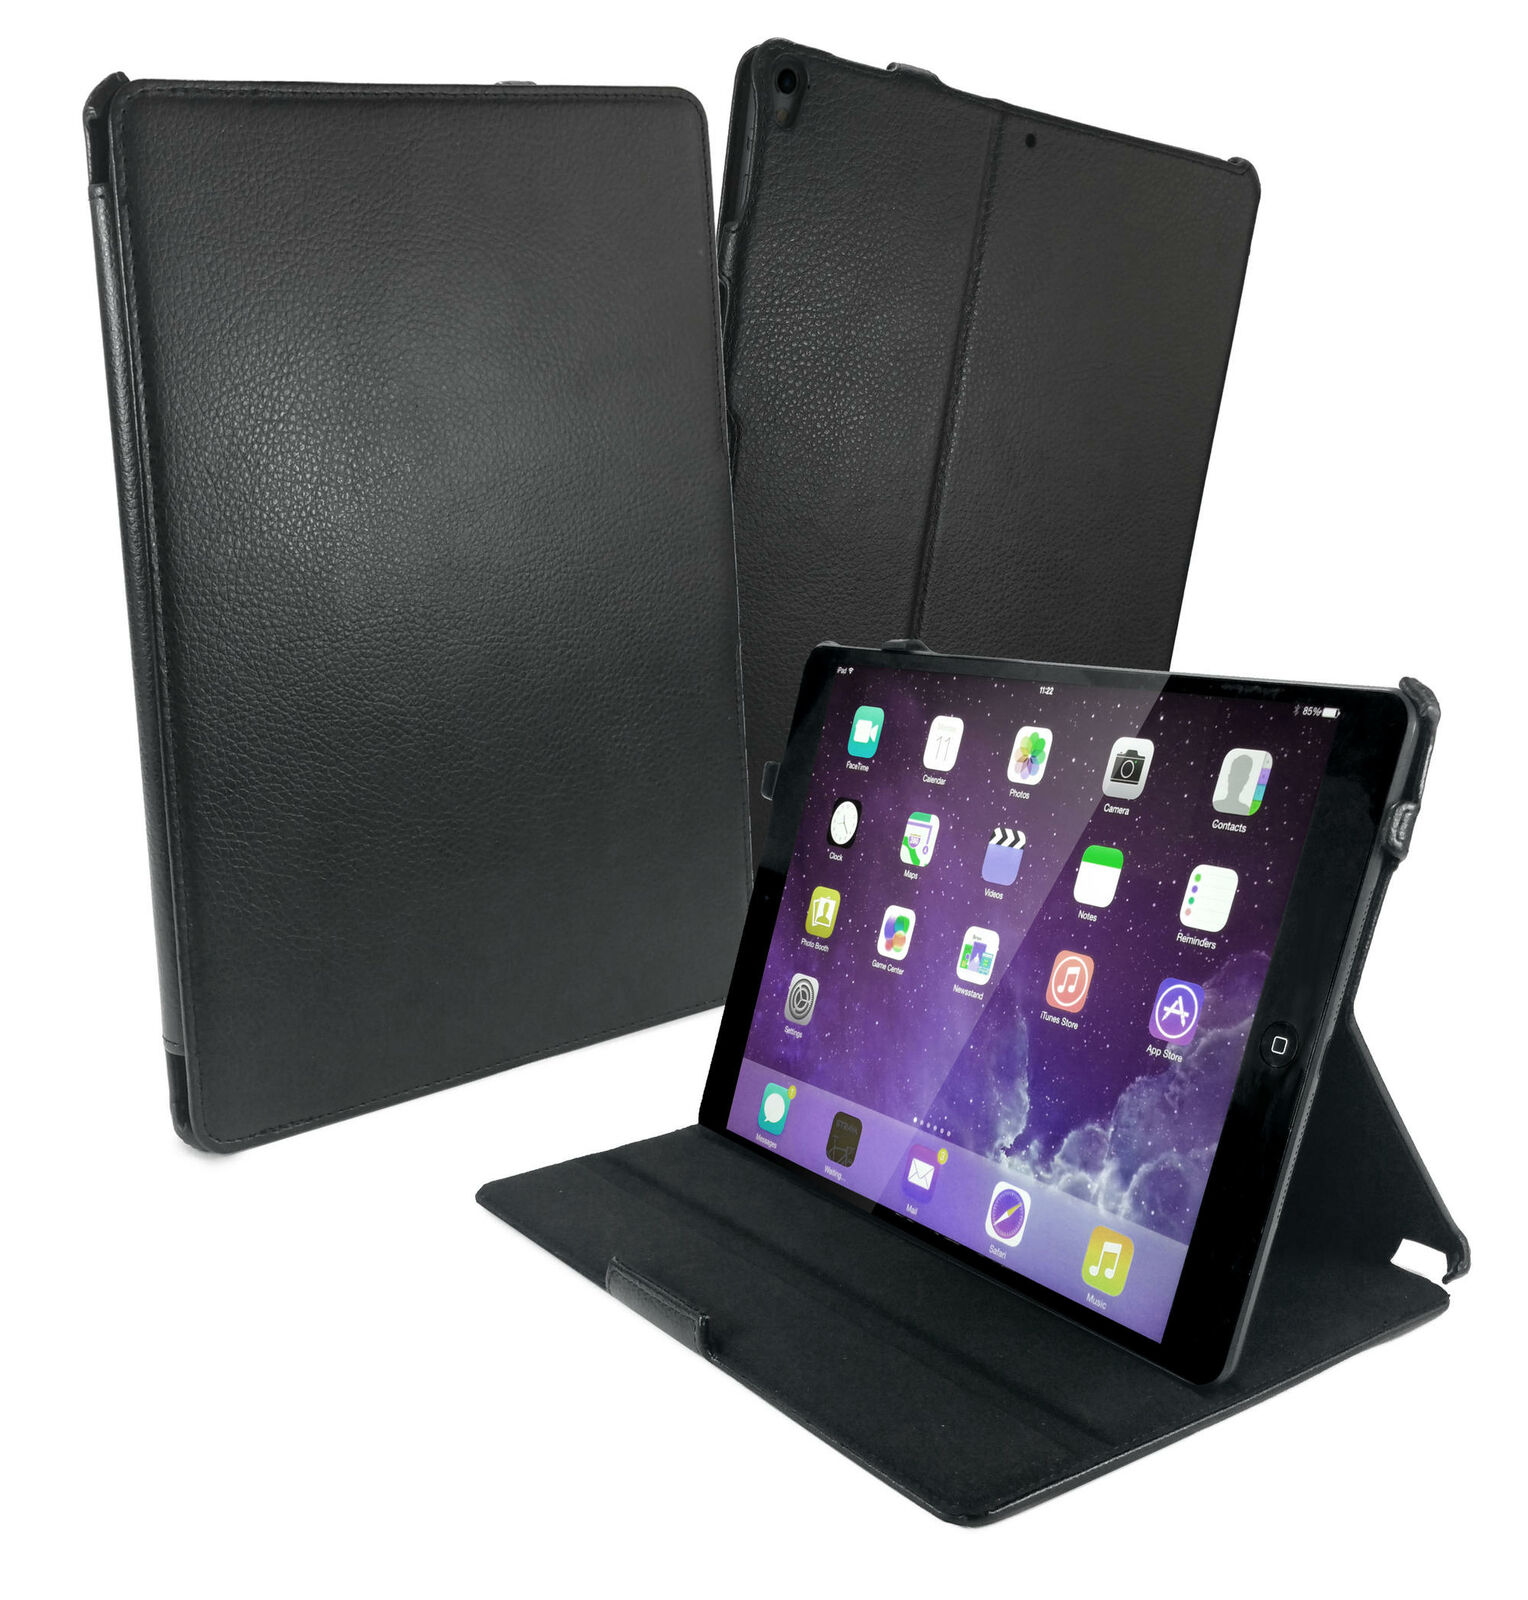 TUFF LUV Multi-View Faux Leather Case Cover and Stand for iPad Pro 10.5 - Black